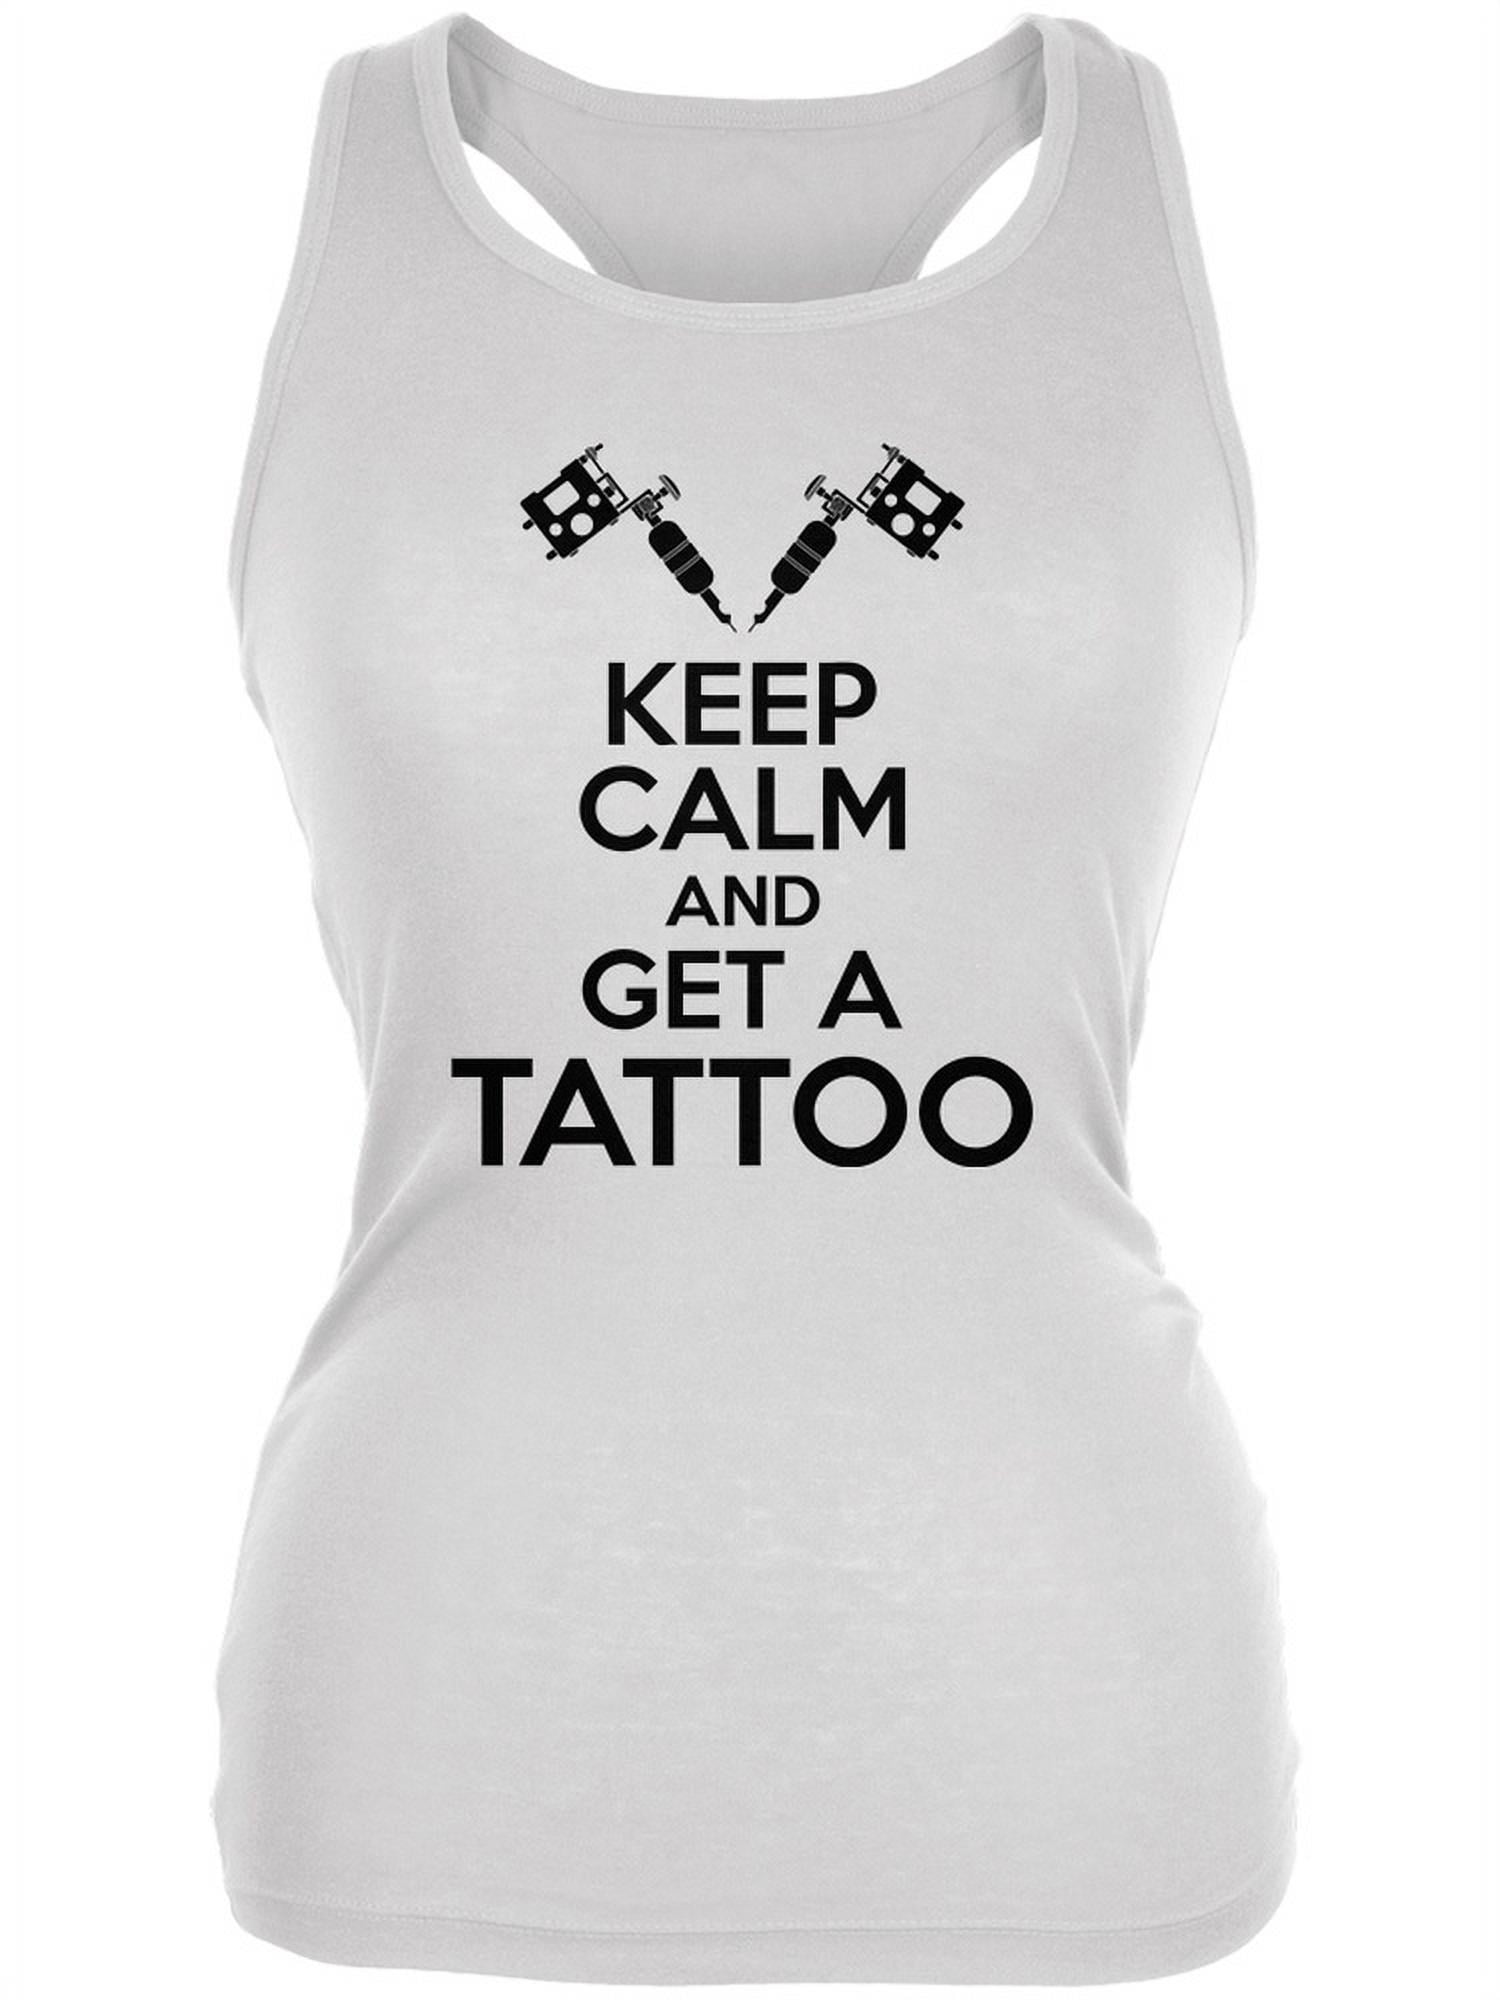 Buy Keep Calm Tattoo Online In India - Etsy India